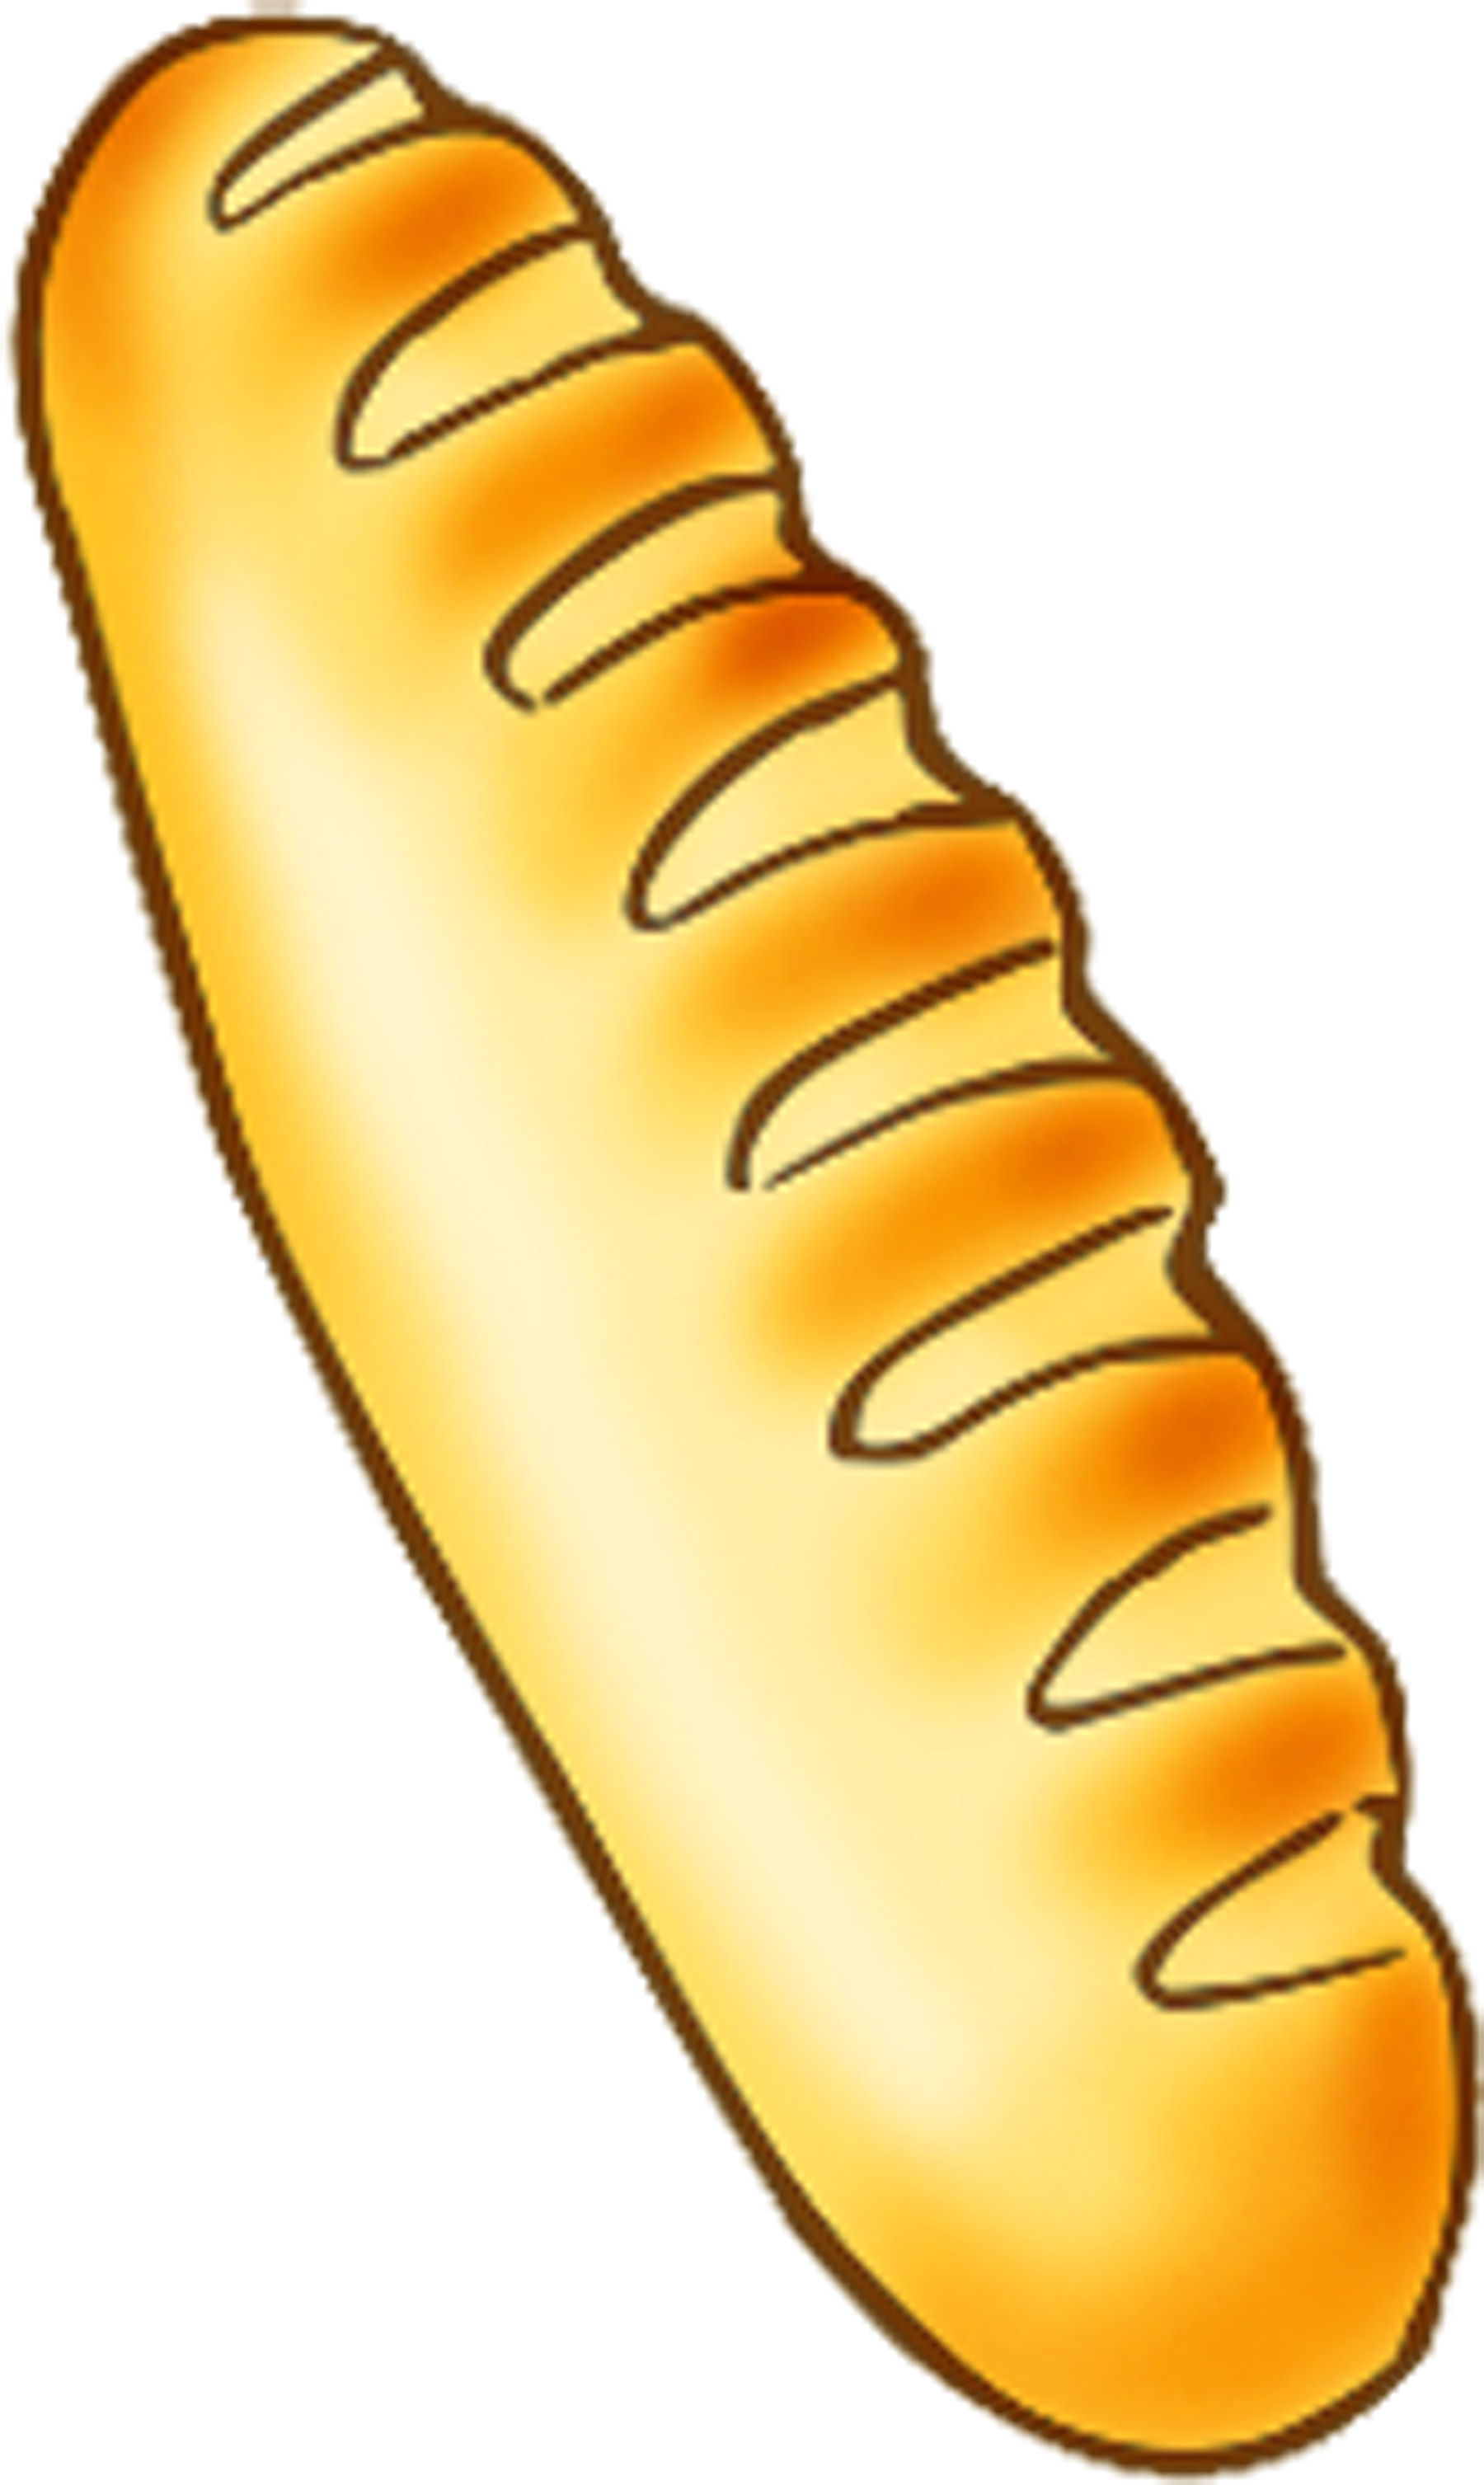 Clipart bread bread french. Panda free images